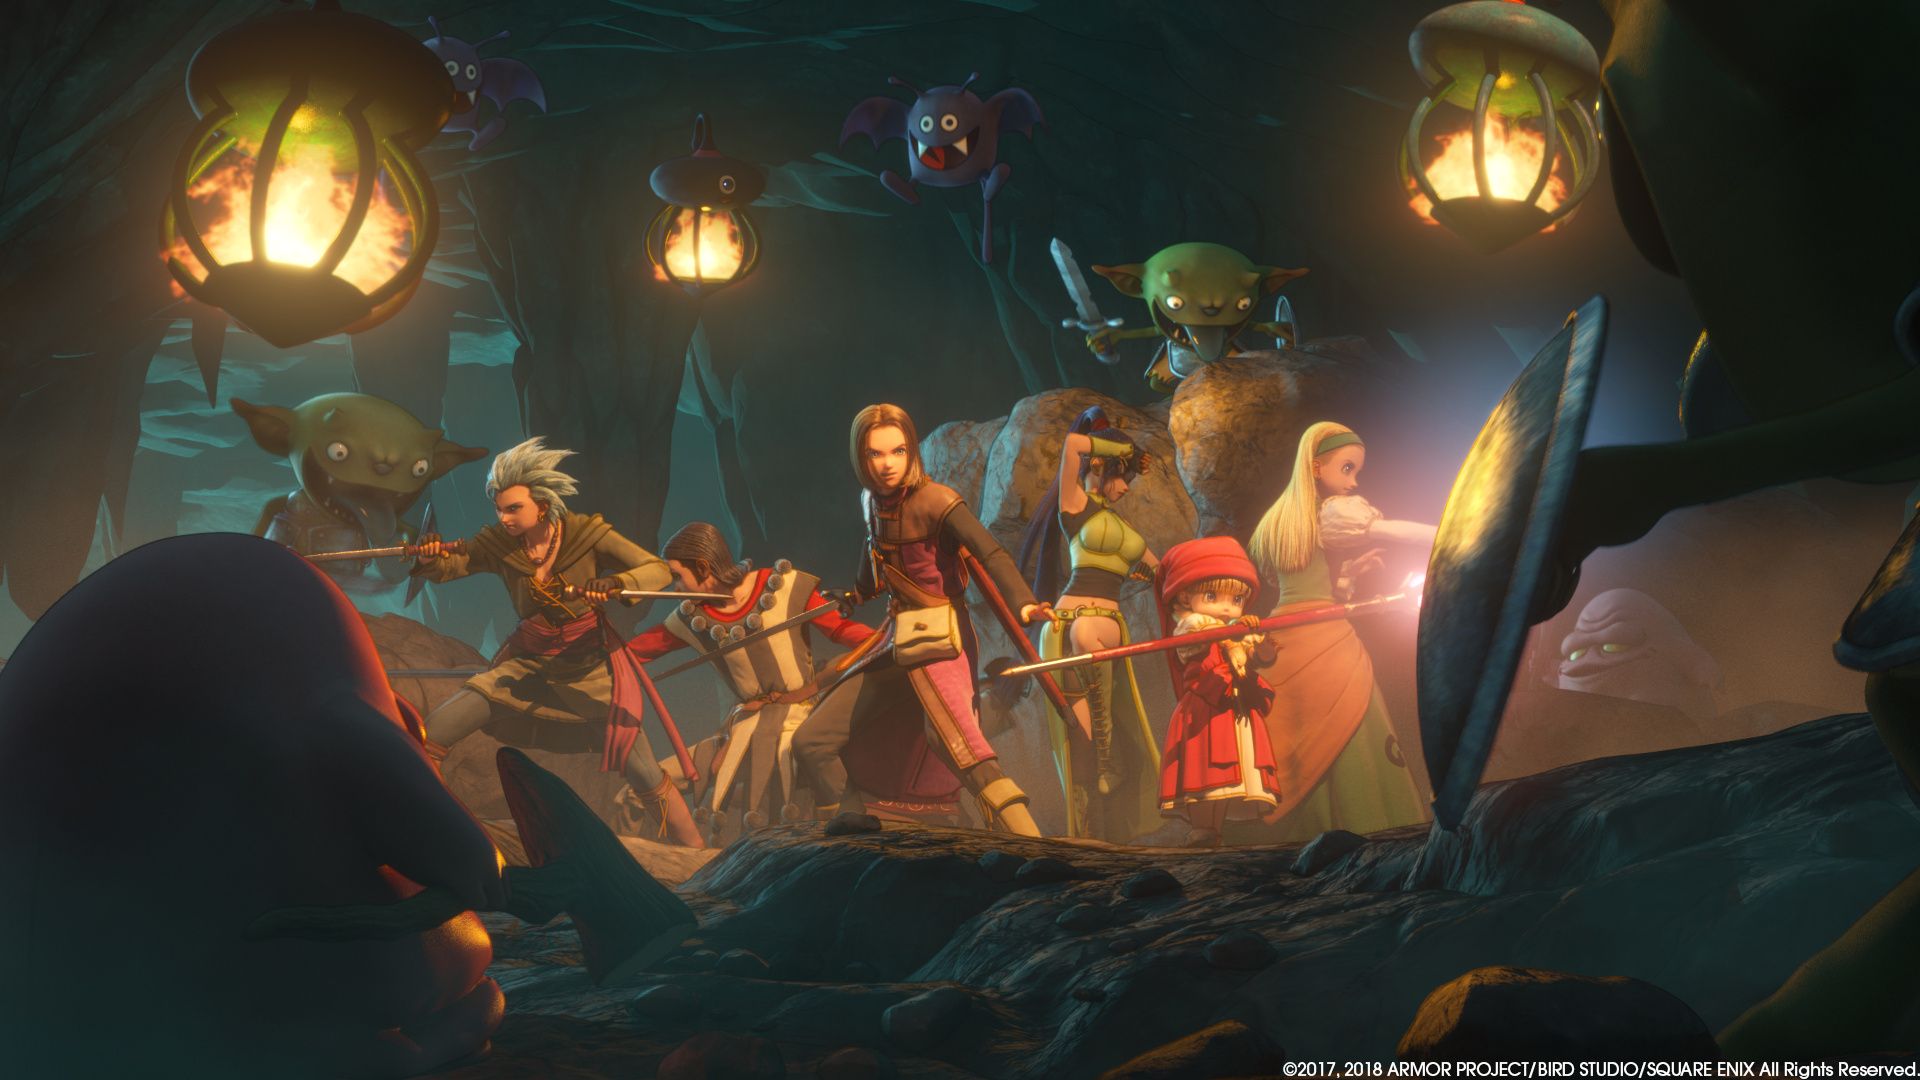 Site News: Where's Our Dragon Quest XI PS4 Review?